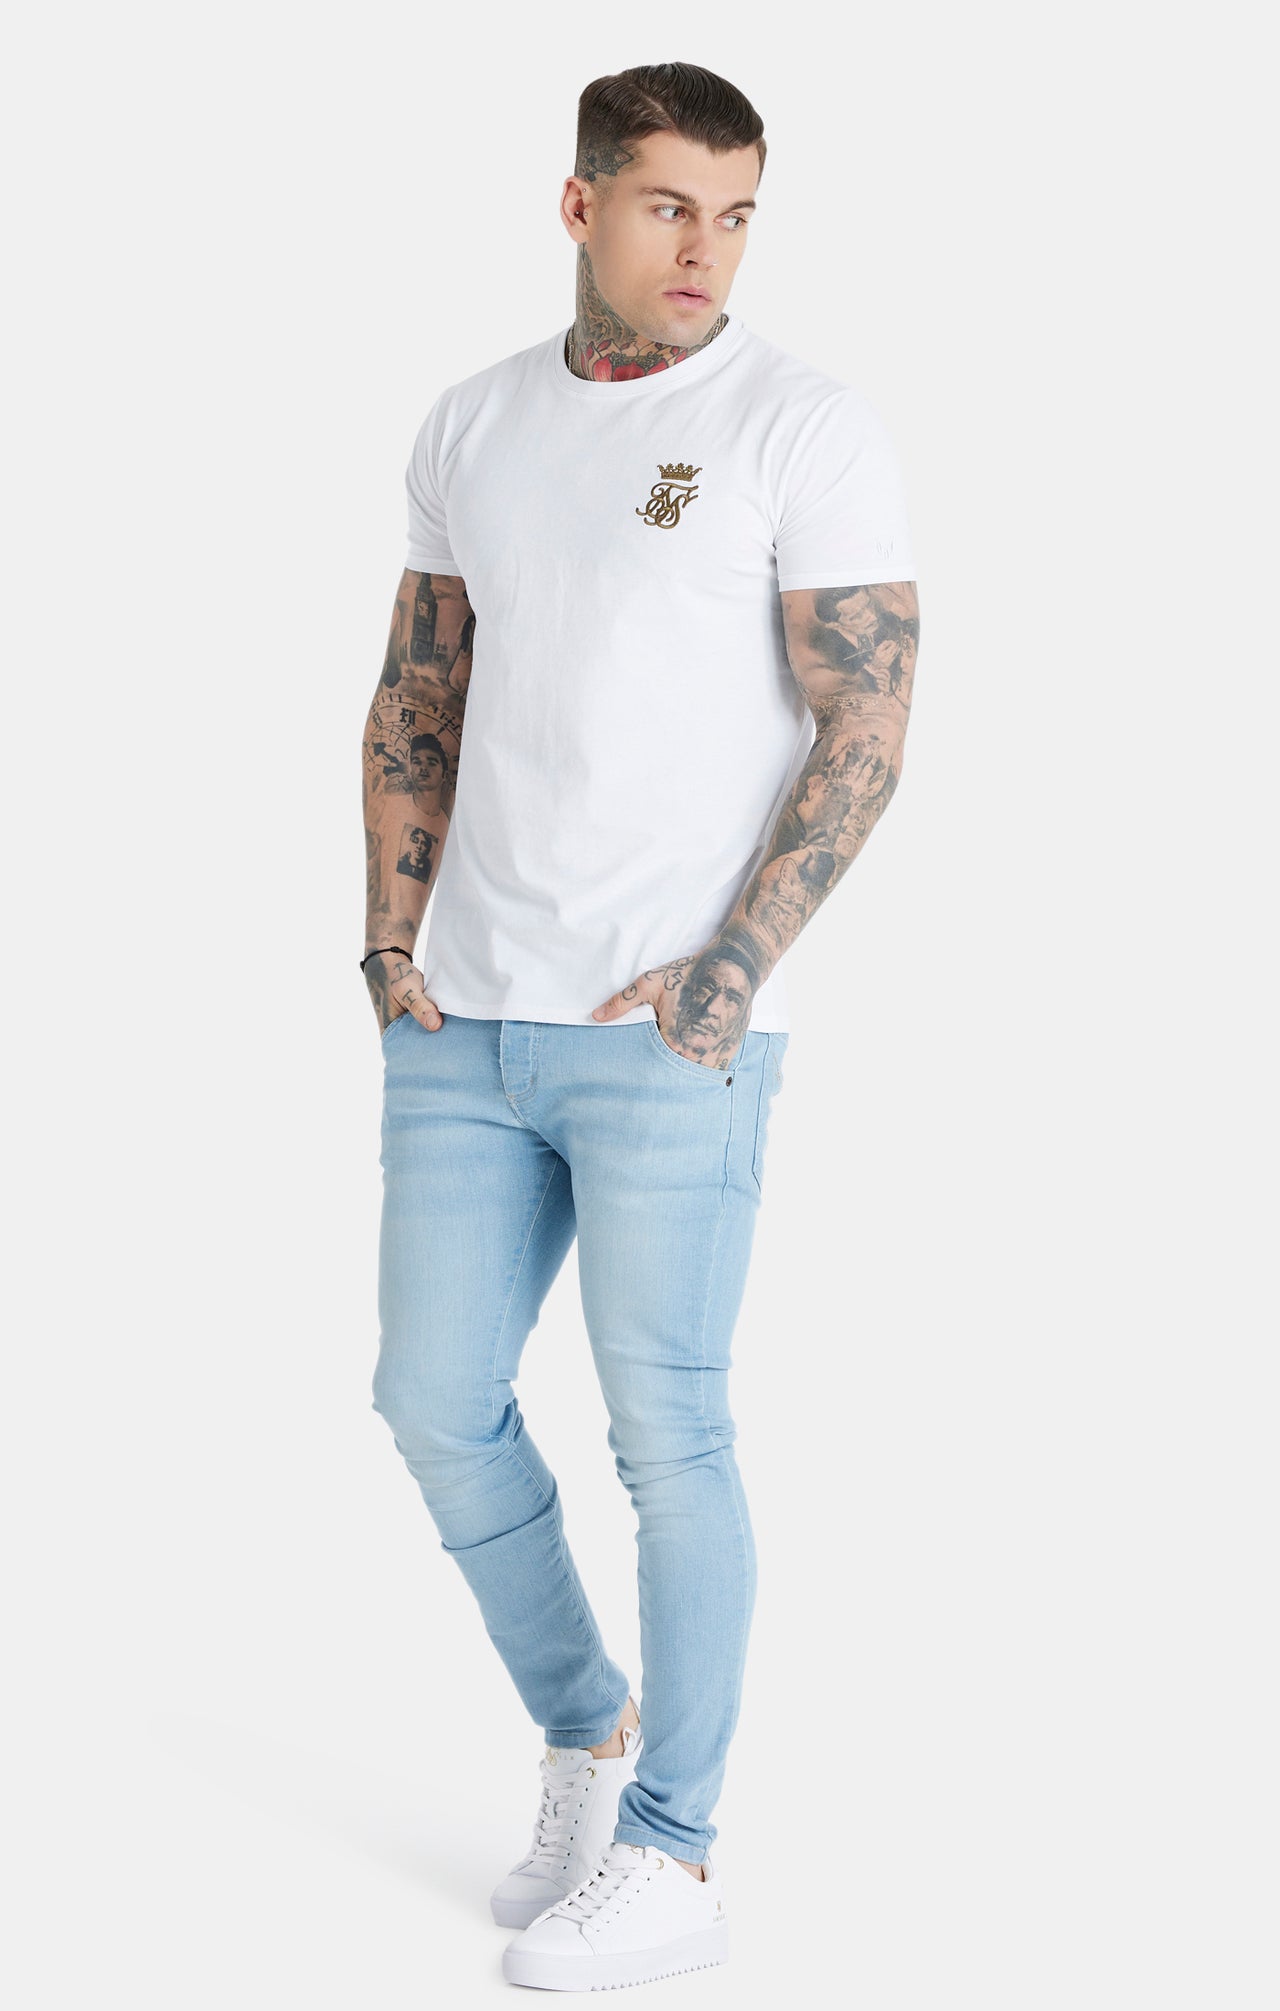 Messi x SikSilk White Muscle Fit T-Shirt (2)